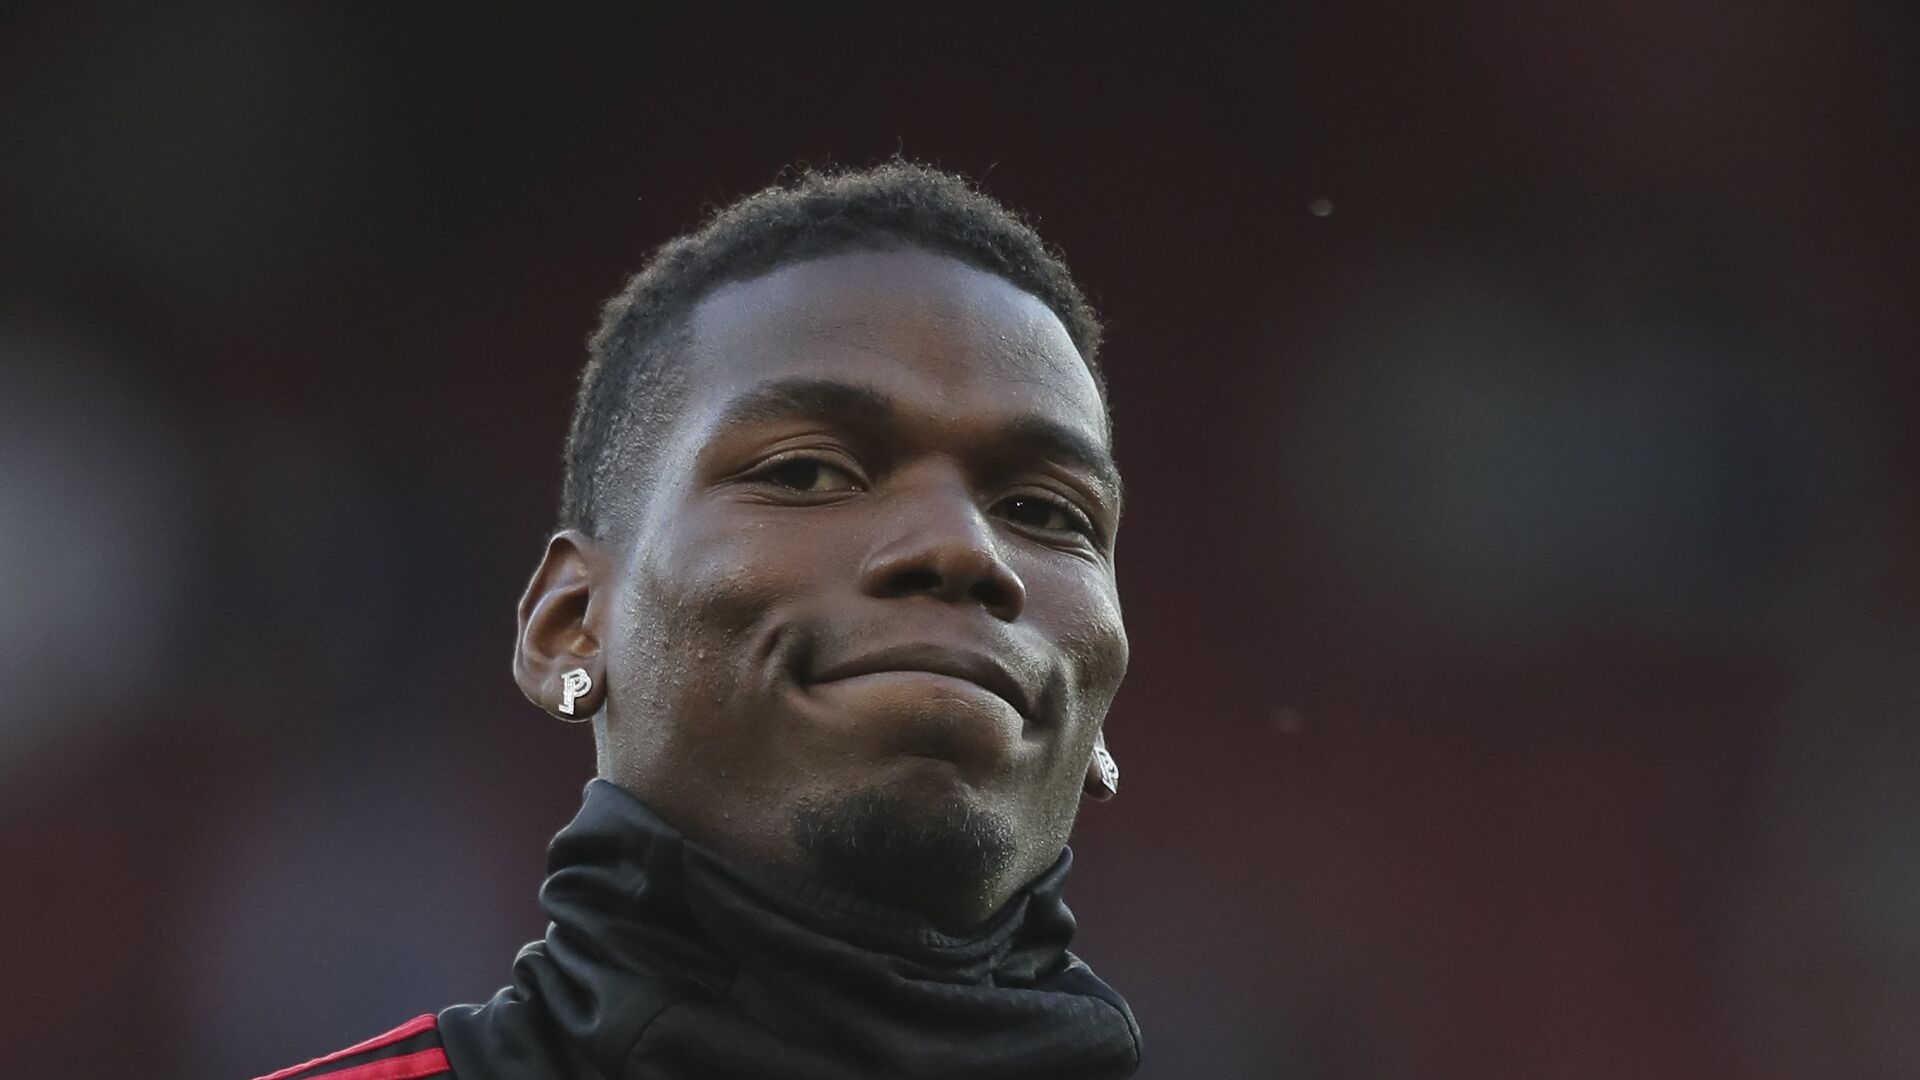 Manchester United's Paul Pogba applauds the fans as he takes part in the warm up prior to the start of the English Premier League soccer match between Manchester United and Leicester City at Old Trafford, in Manchester, England, Friday, Aug. 10, 2018 - اسپوتنیک افغانستان  , 1920, 14.11.2021